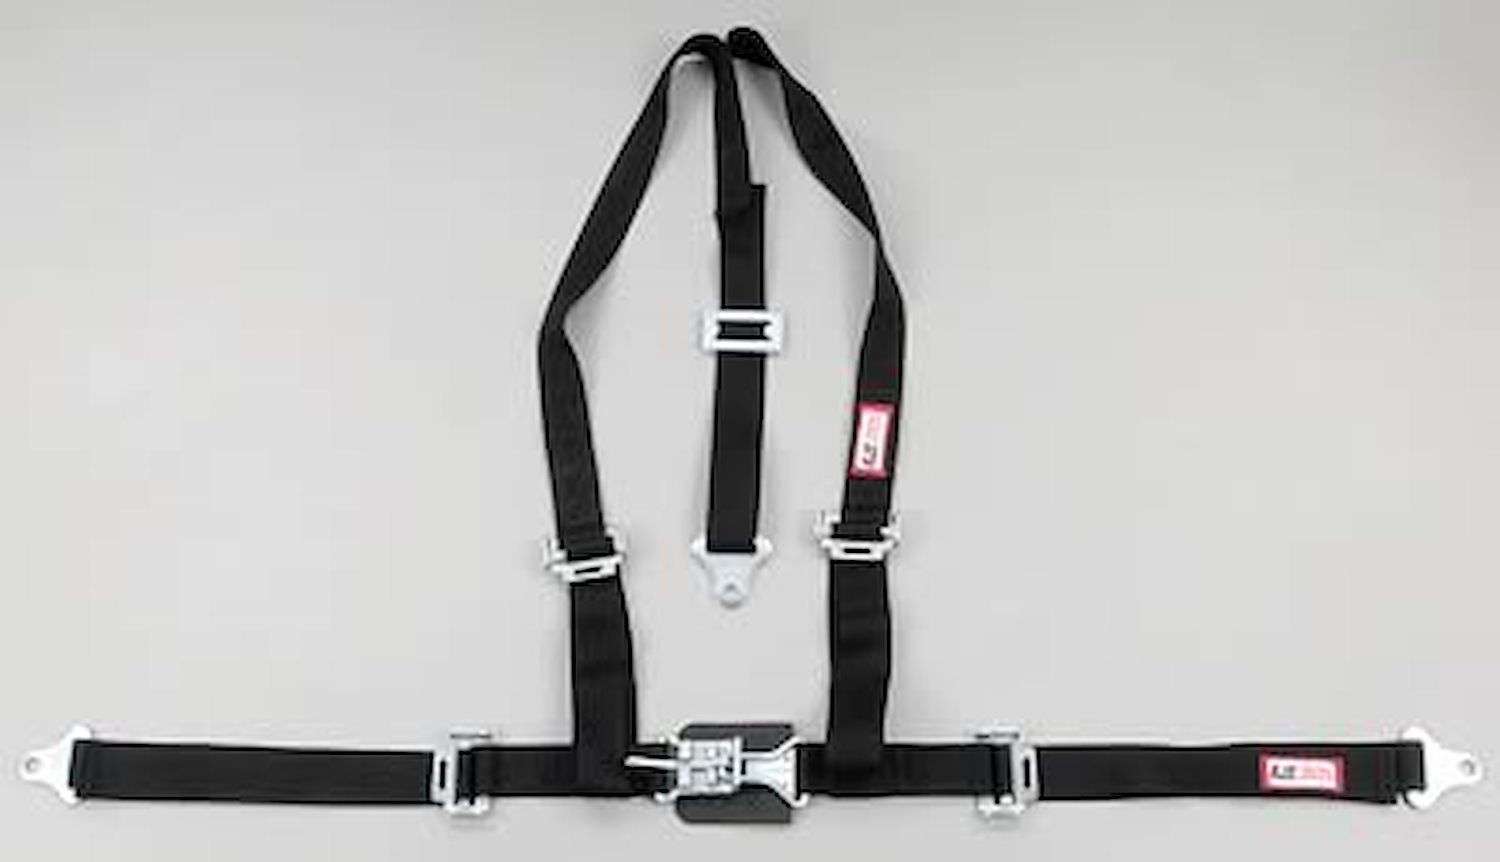 NON-SFI L&L HARNESS 3 PULL UP Lap Belt w/adjuster 2 S.H. V ROLL BAR Mount ALL SNAP ENDS PURPLE